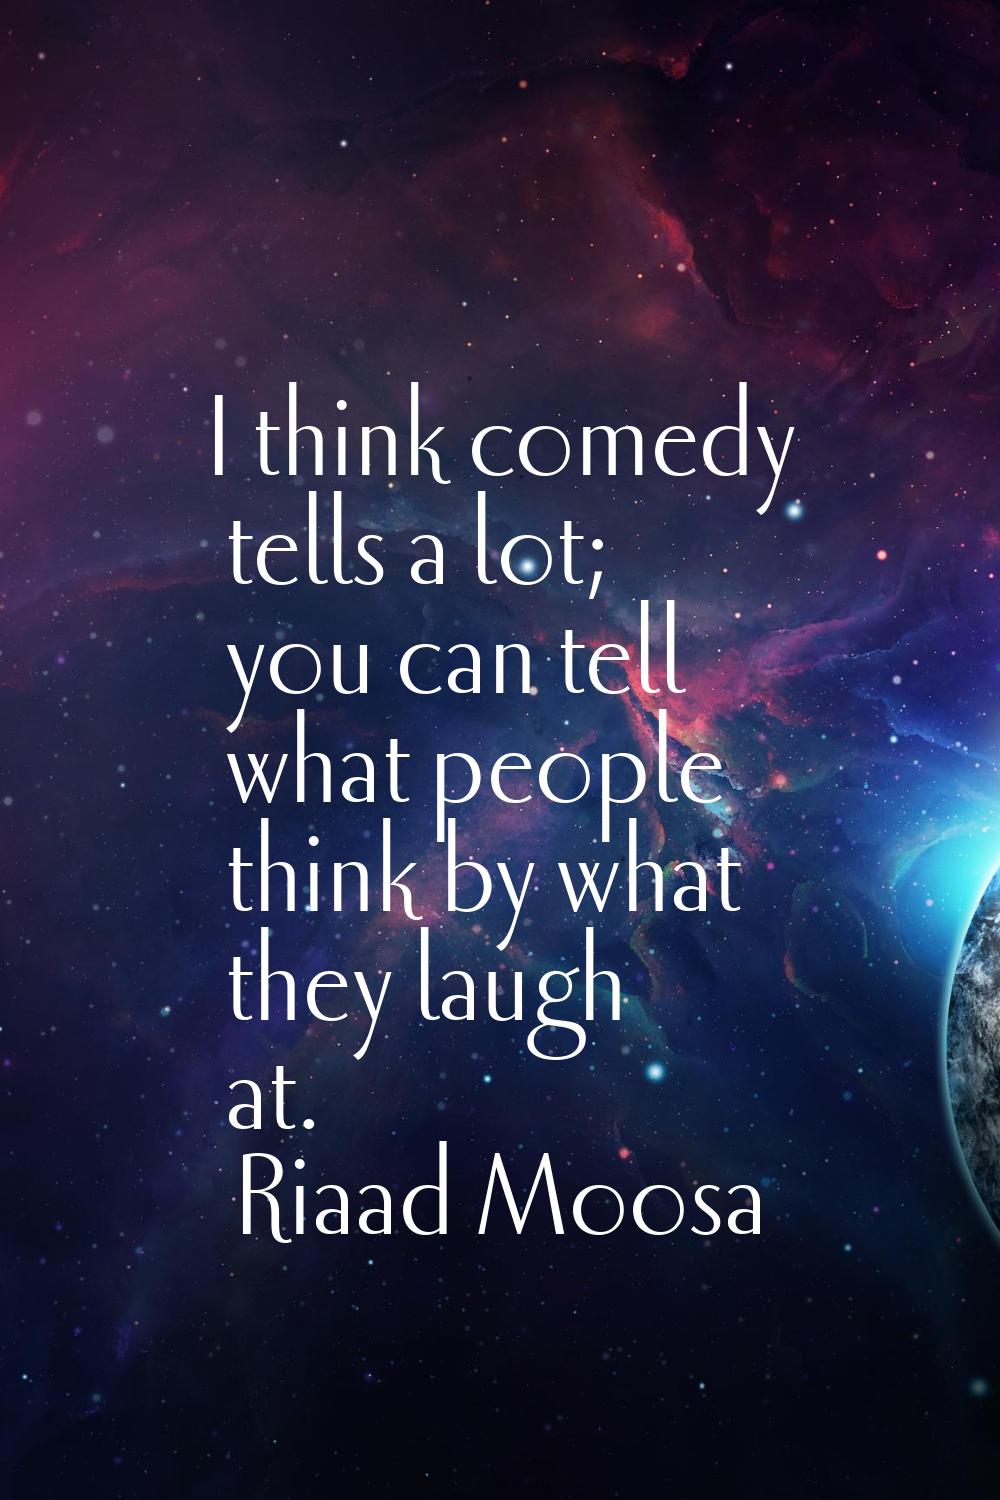 I think comedy tells a lot; you can tell what people think by what they laugh at.